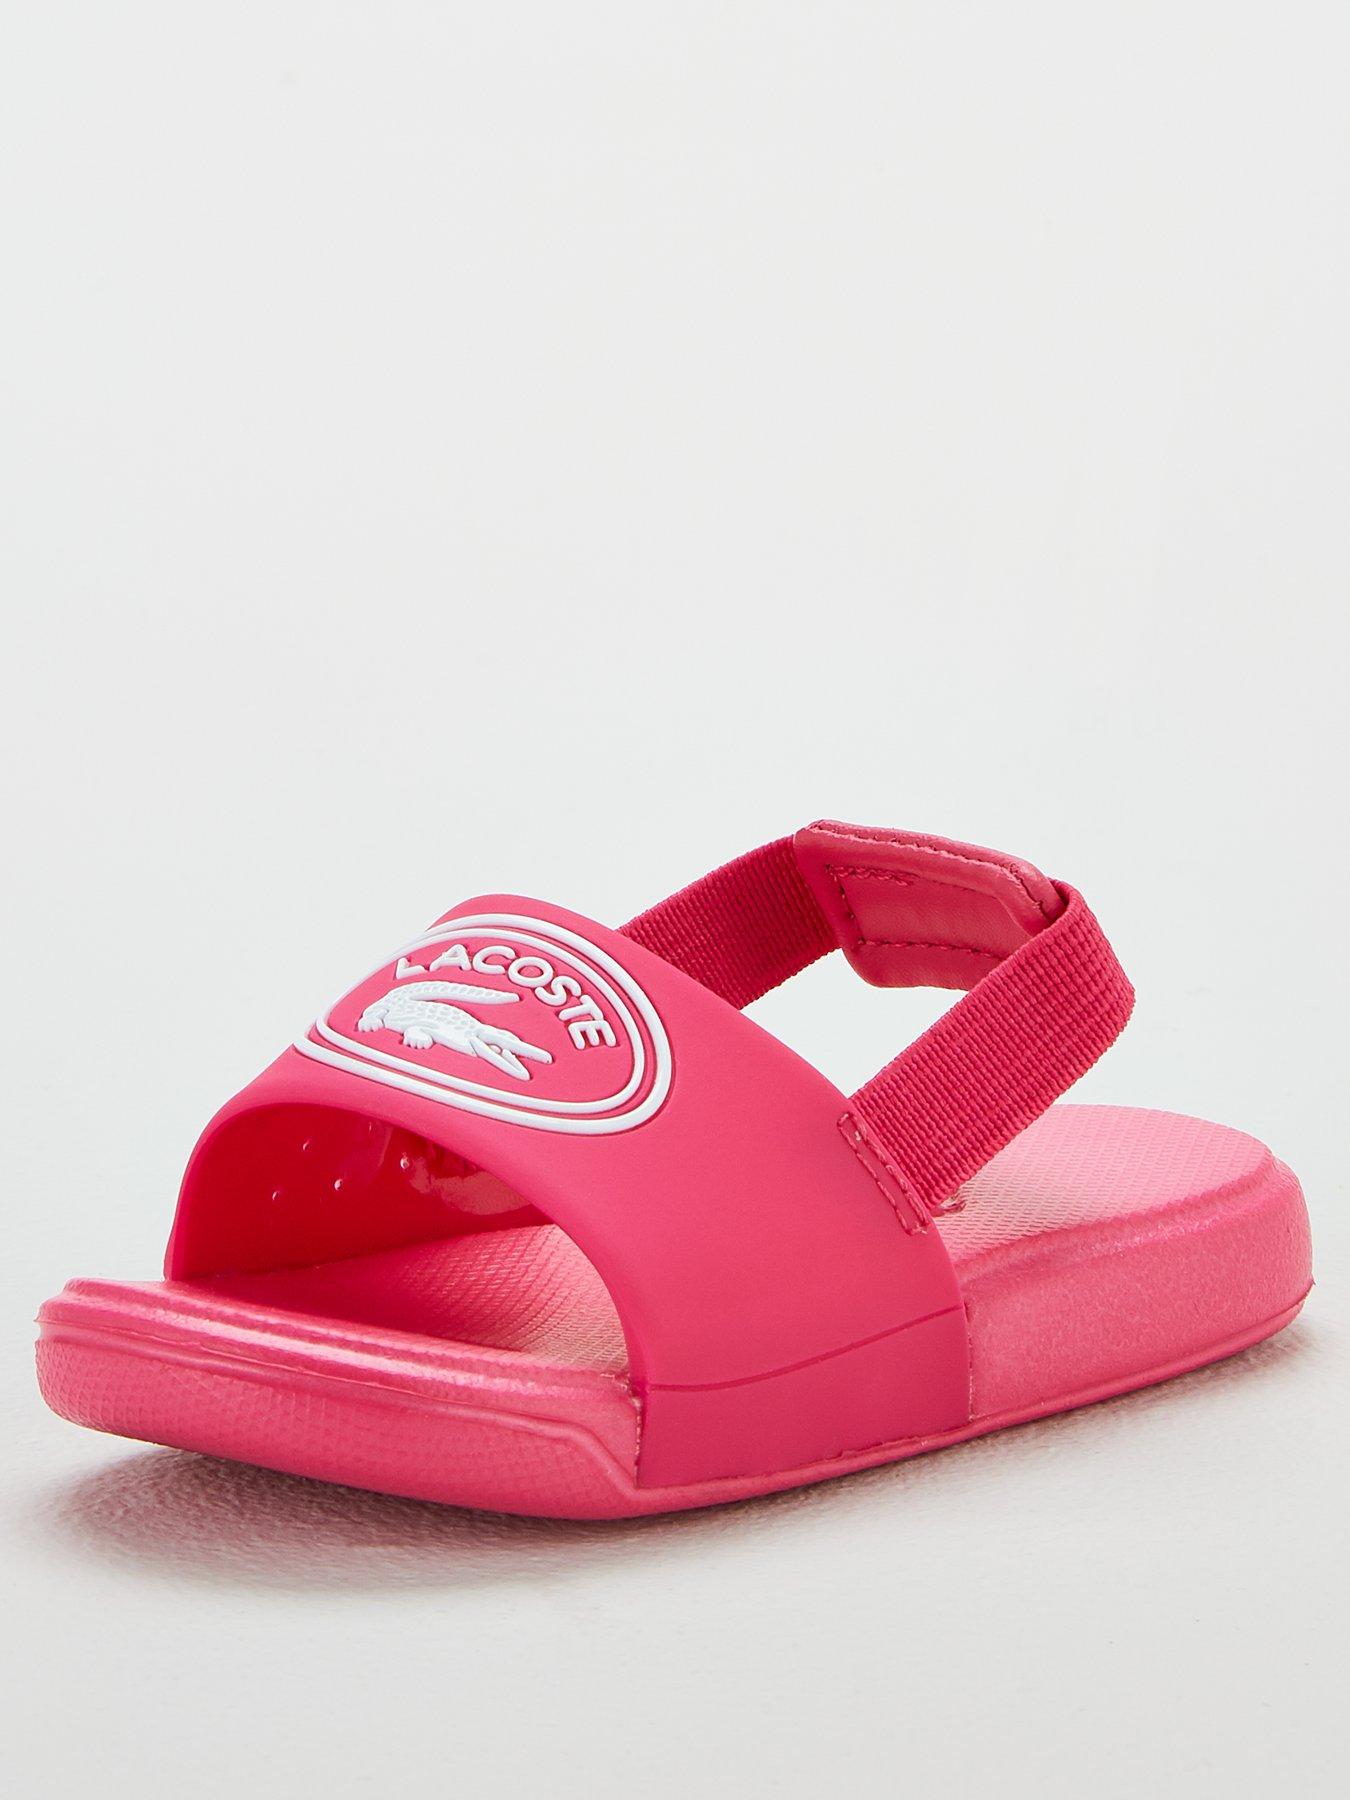 lacoste pink sliders